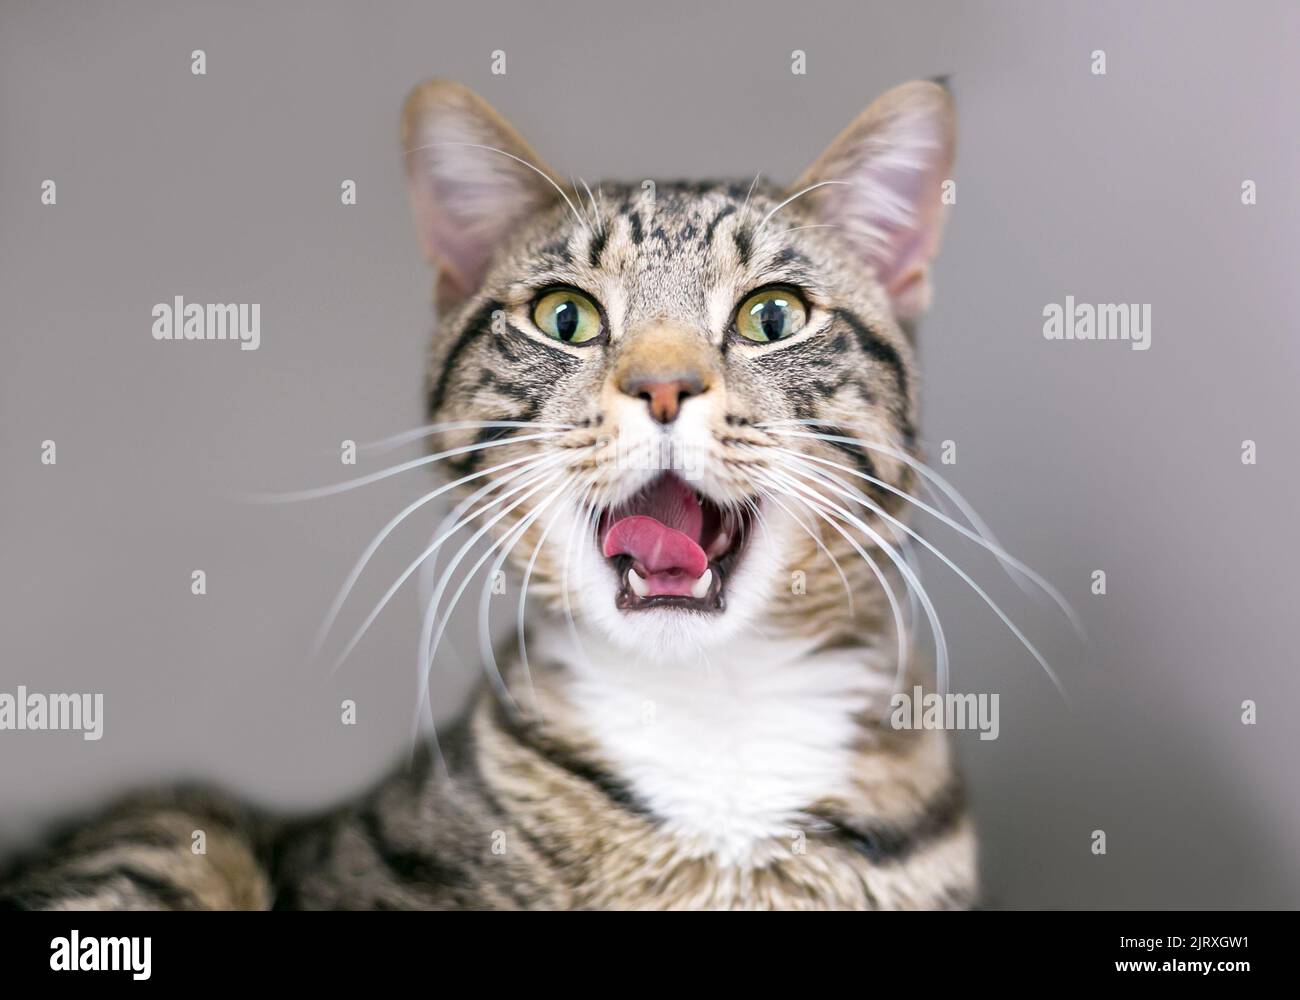 A brown tabby shorthair cat yawning with its mouth wide open Stock Photo